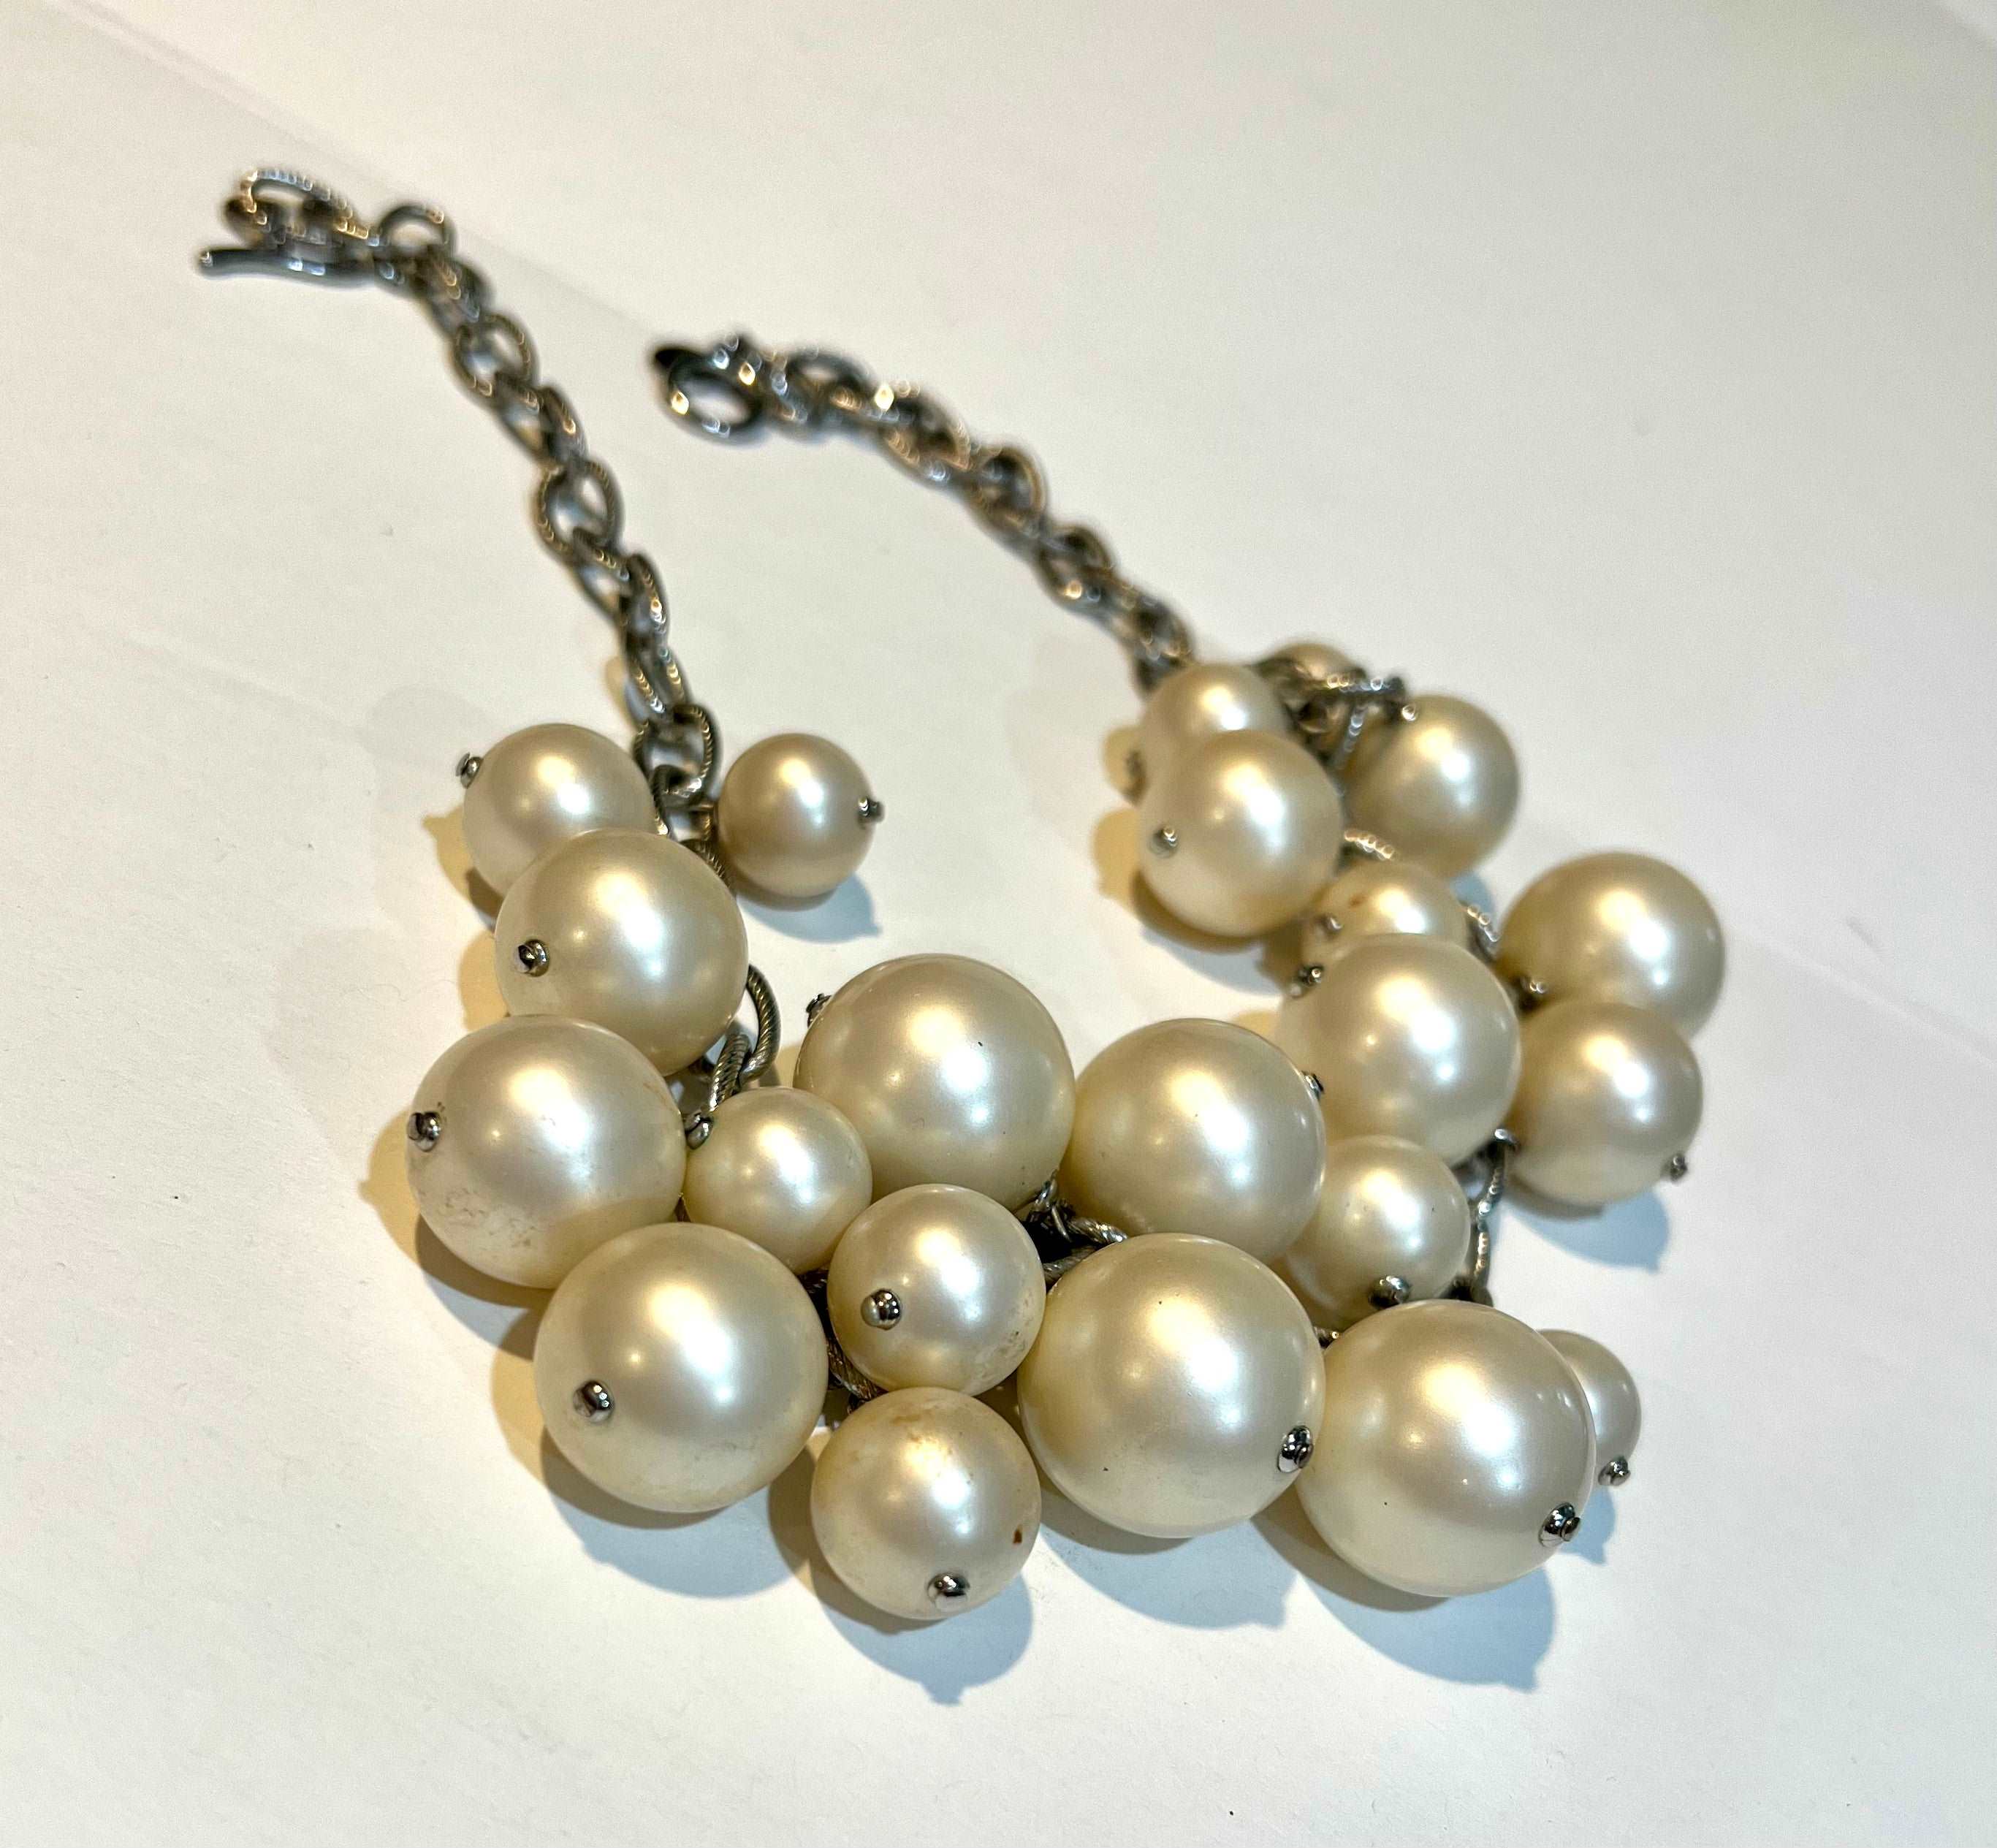 Bold White Baubles Necklace - A Classic Twist with Lustrous Pearlized Beads